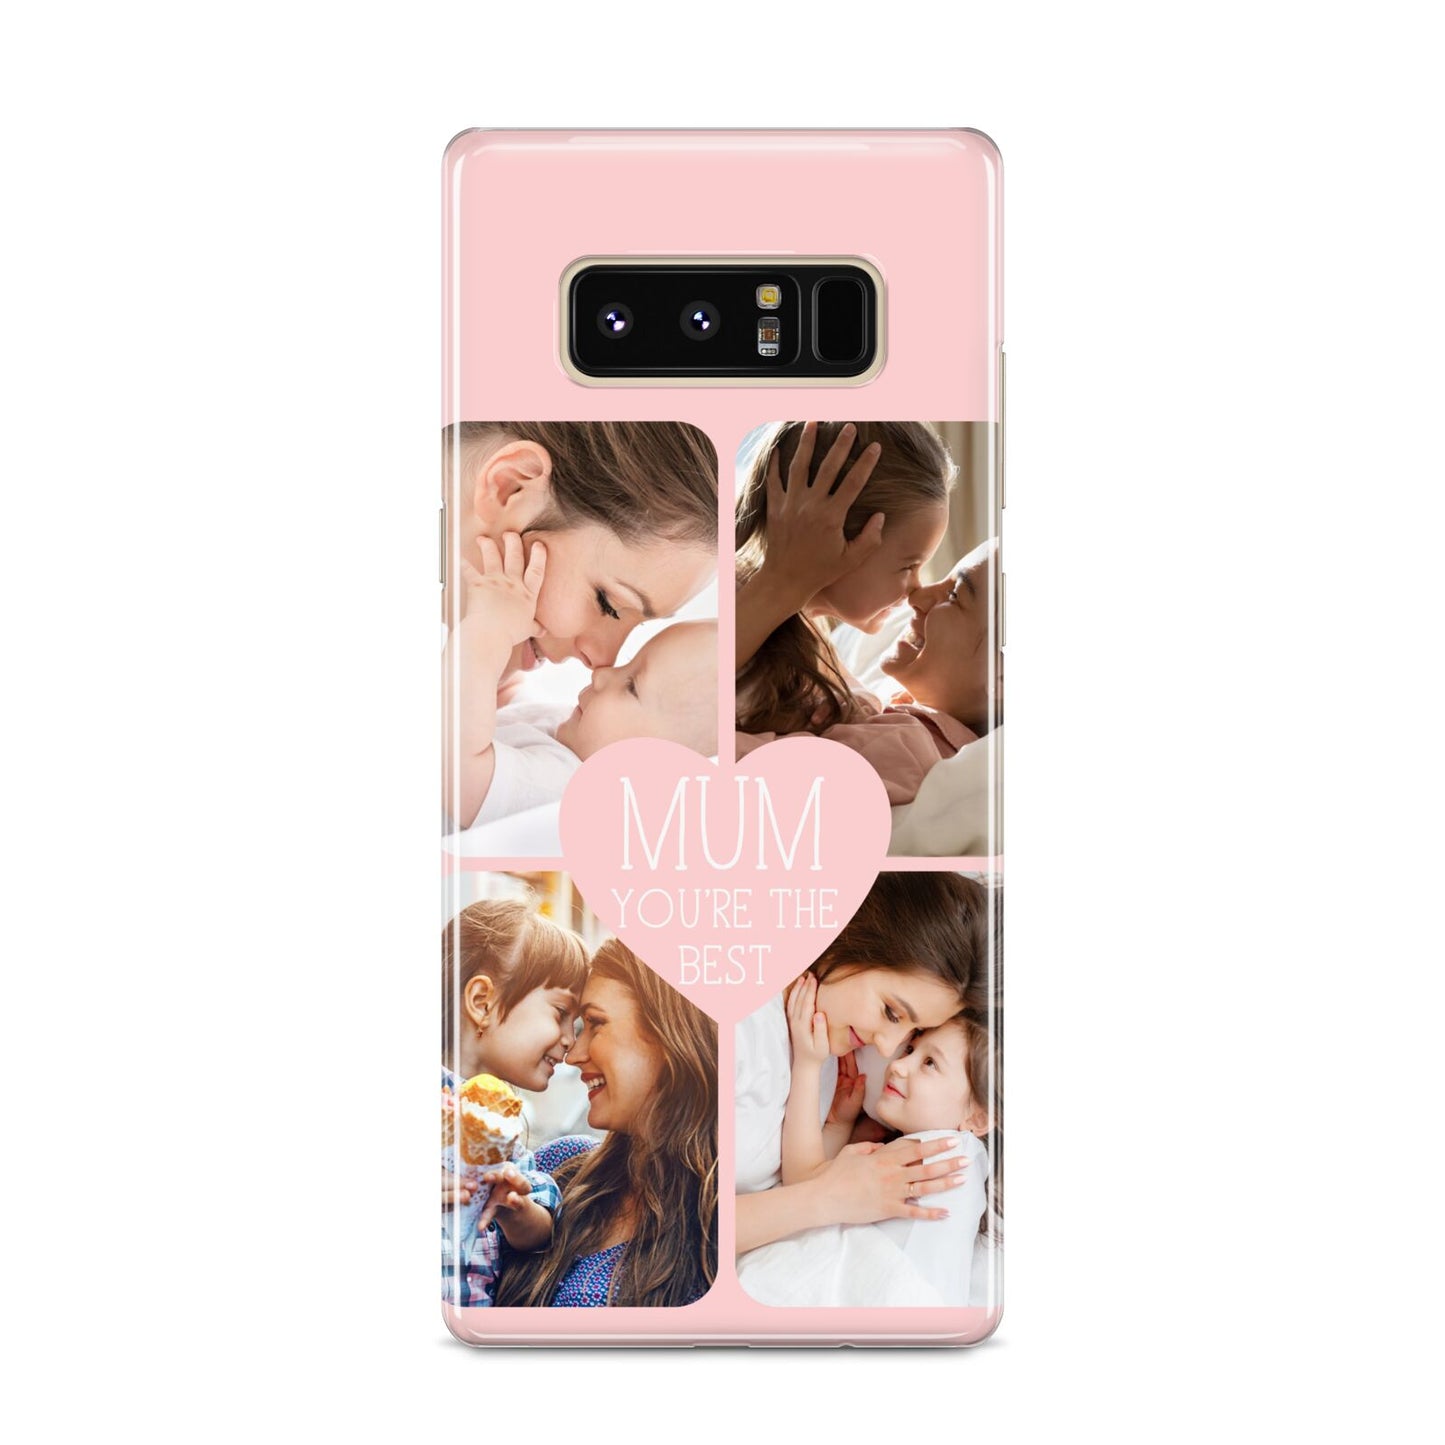 Mothers Day Four Photo Upload Samsung Galaxy S8 Case